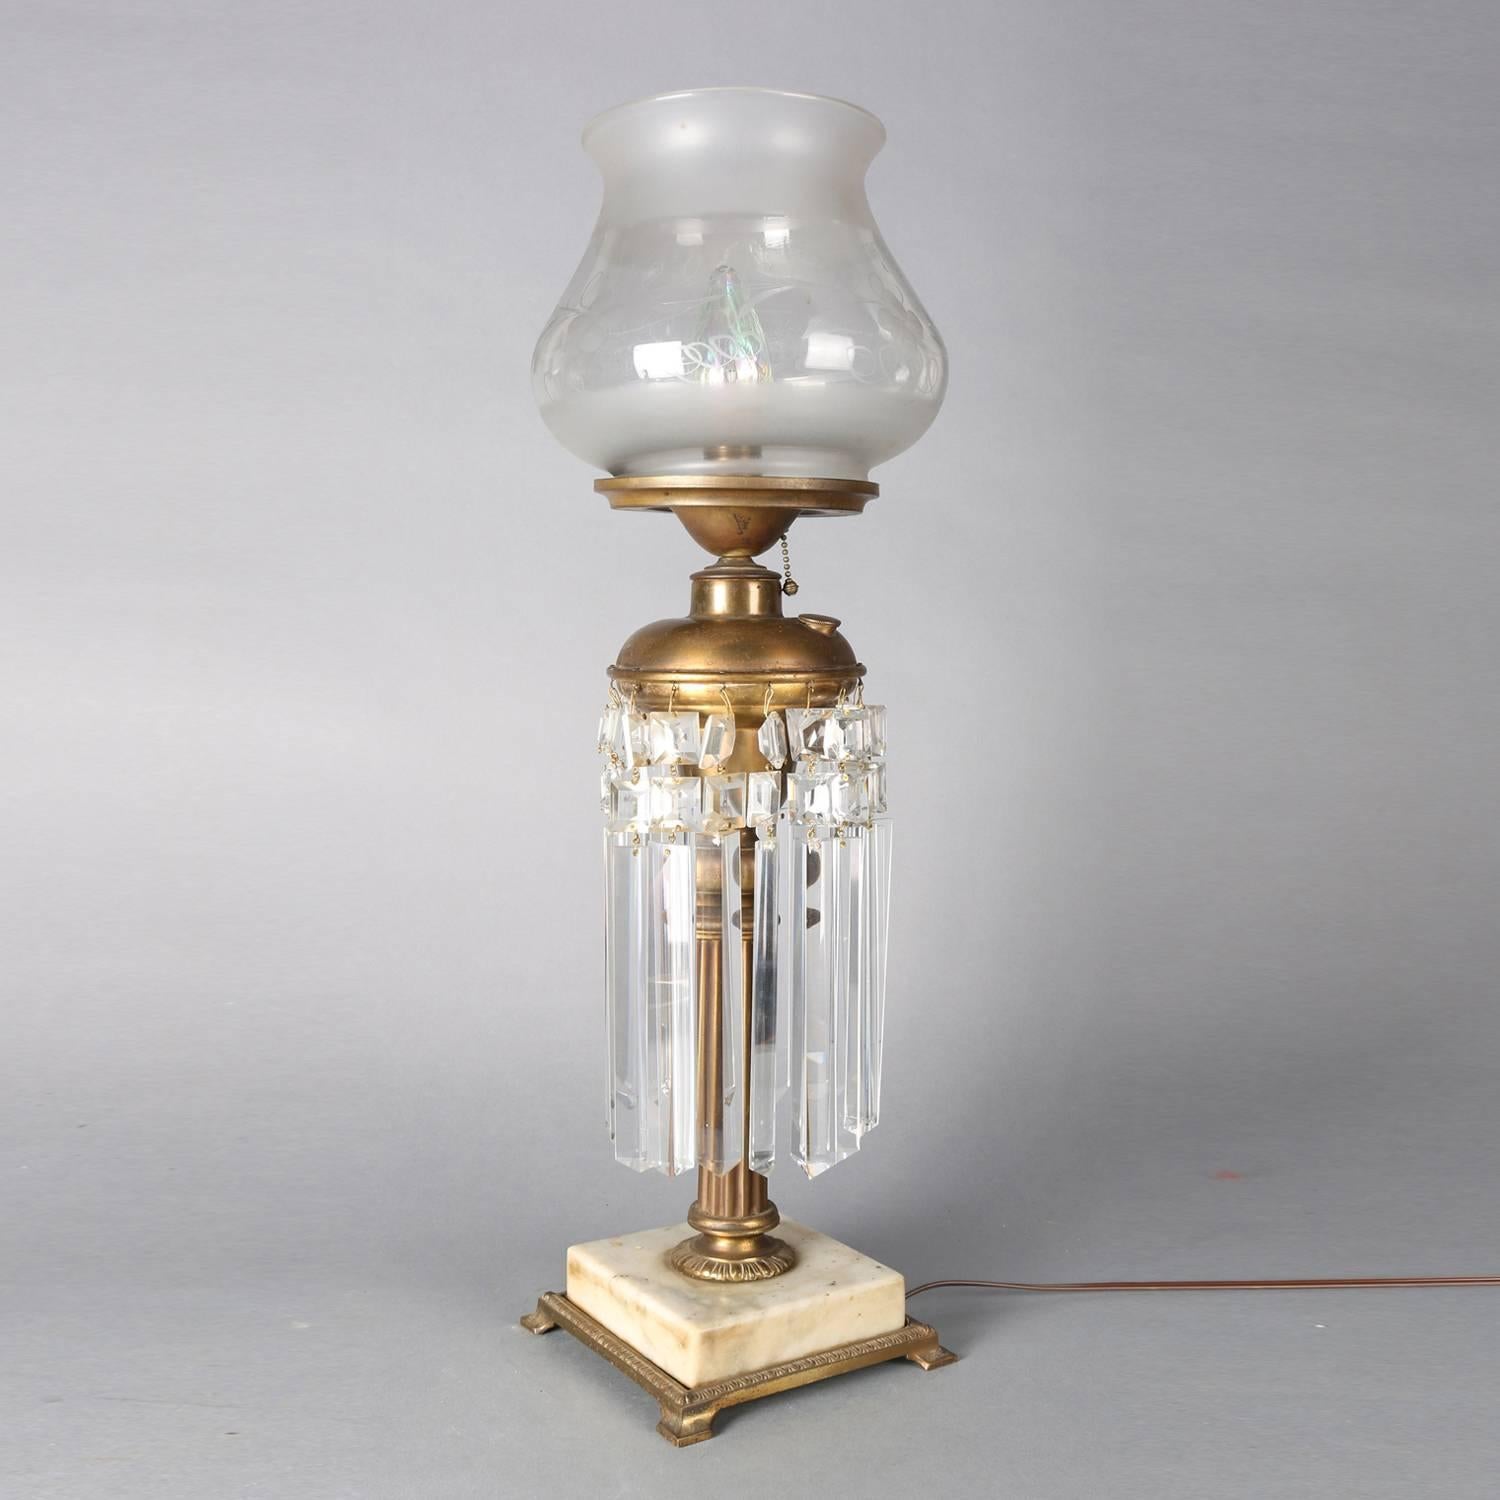 Cast Antique Gilt, Marble and Crystal Electrified Solar Lamp, 19th Century